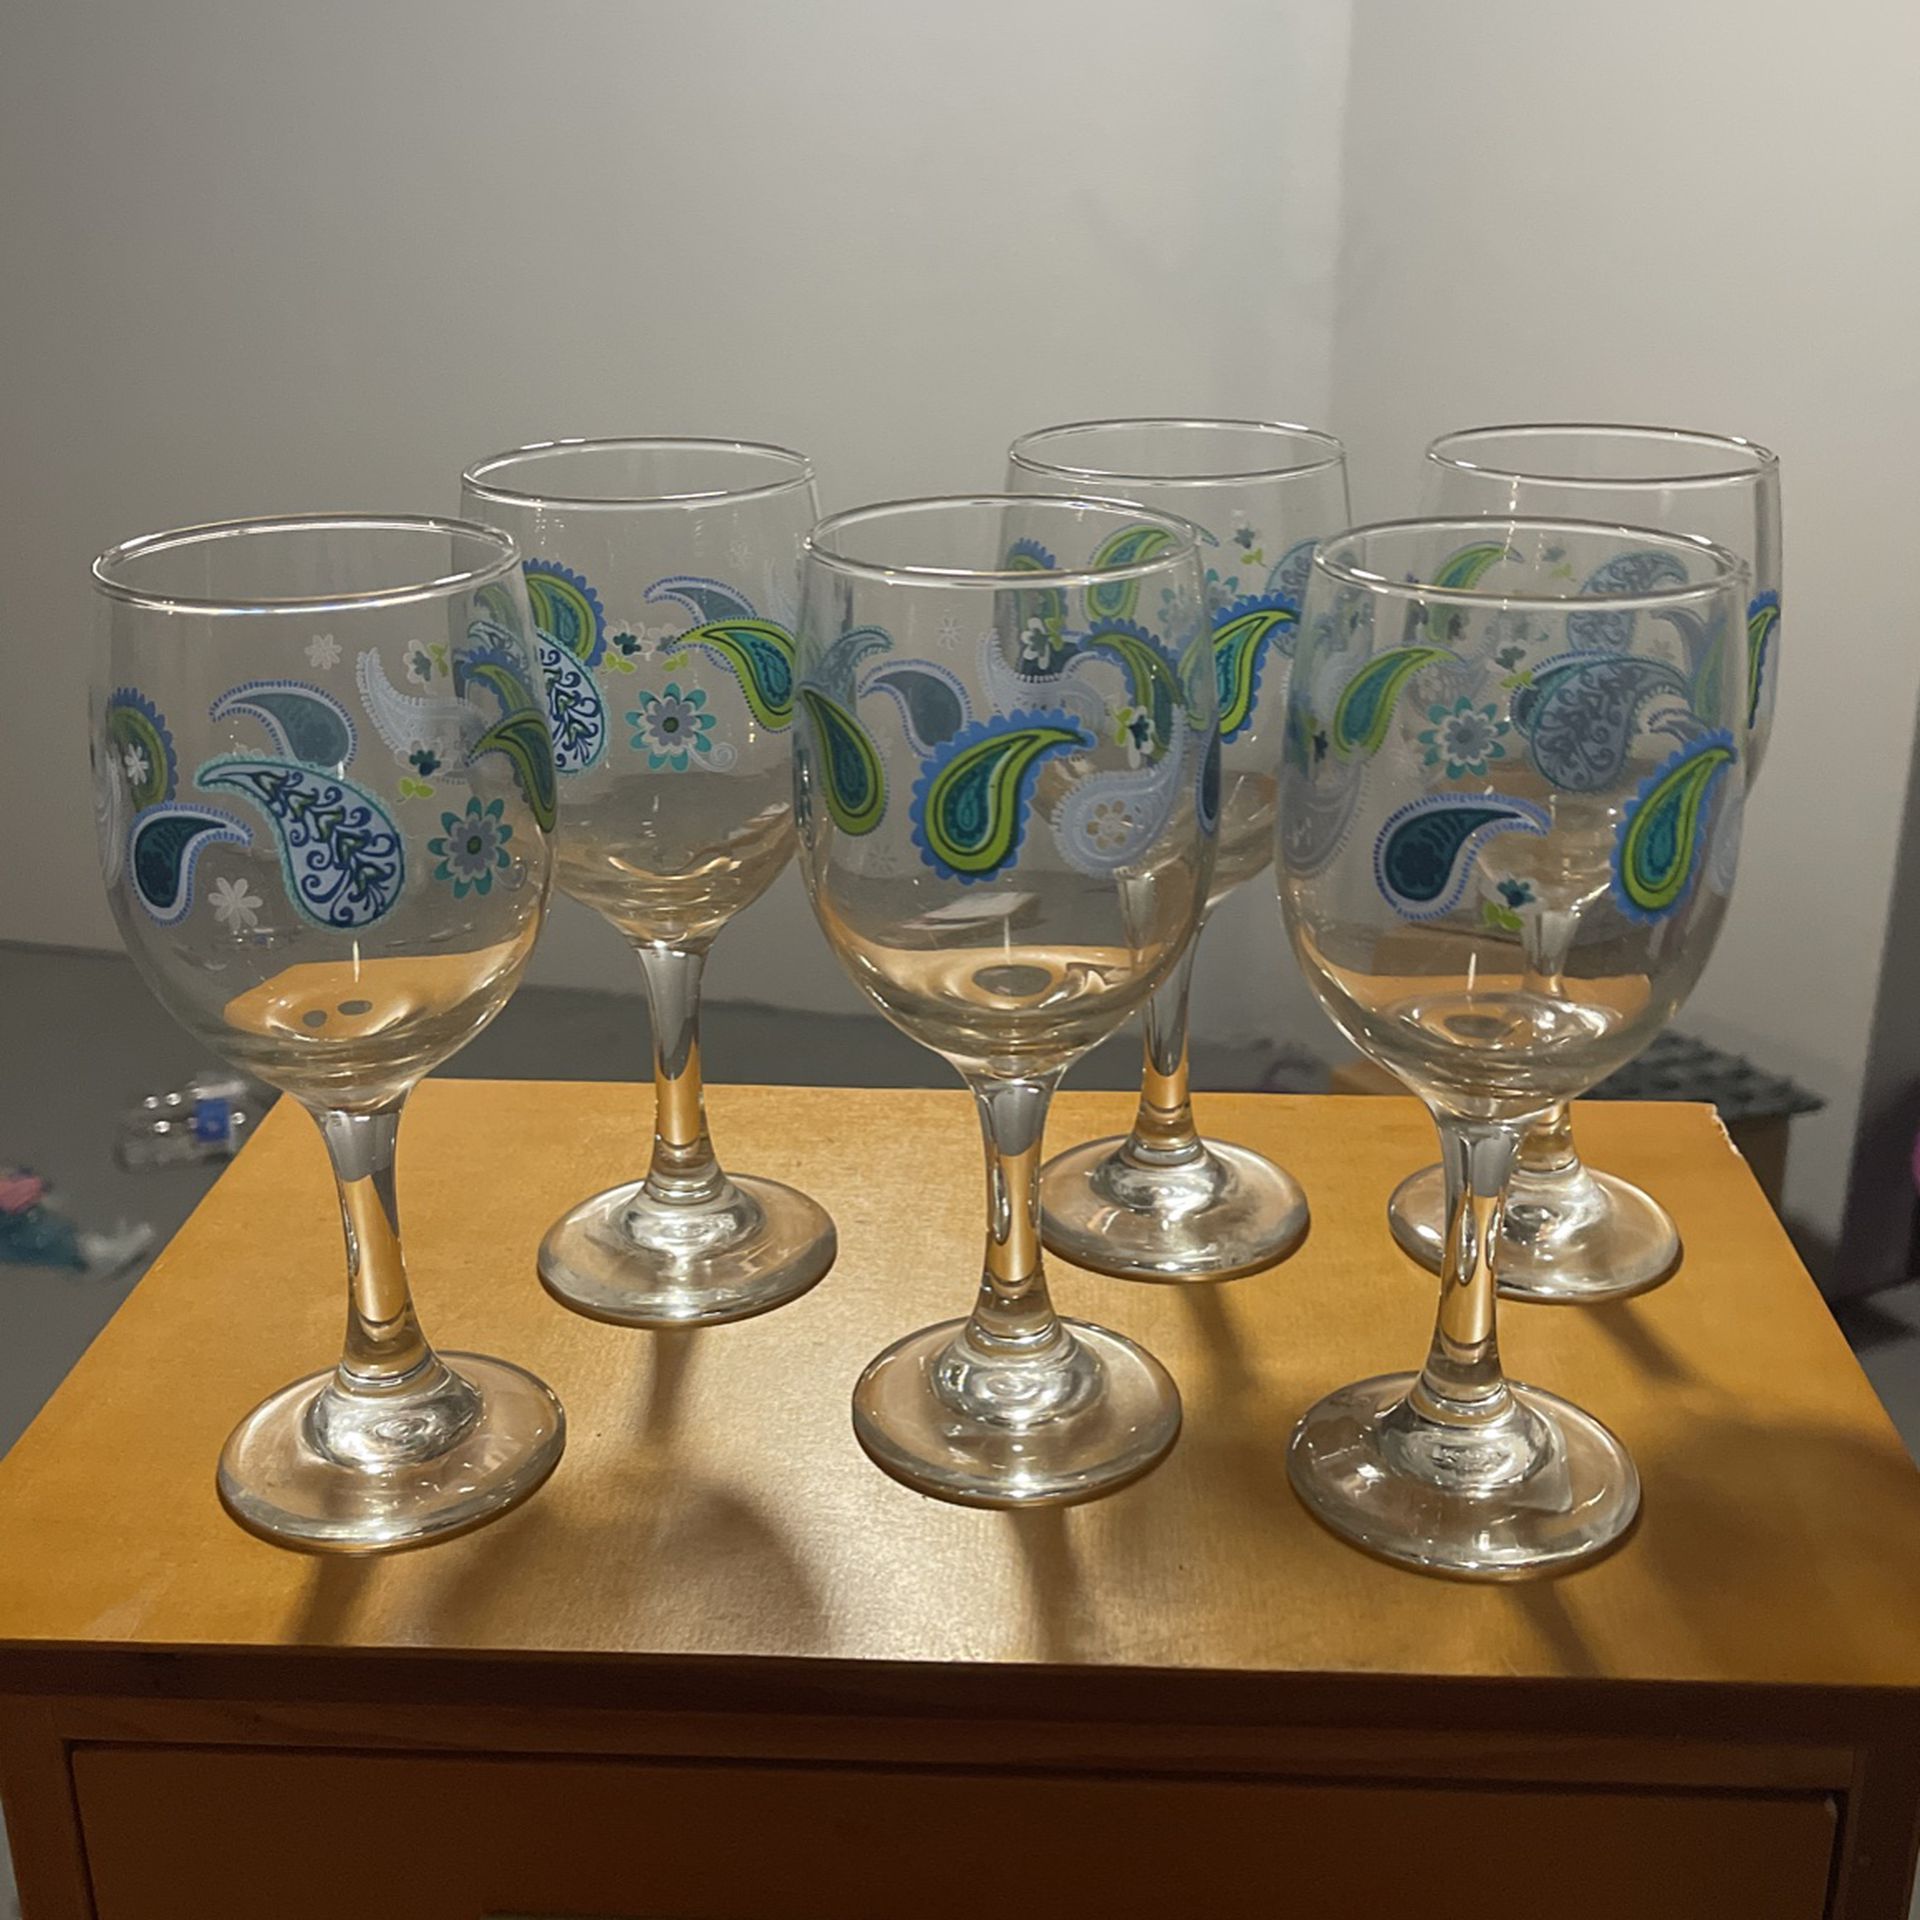 Chanel wine glasses $10 each for Sale in Naperville, IL - OfferUp